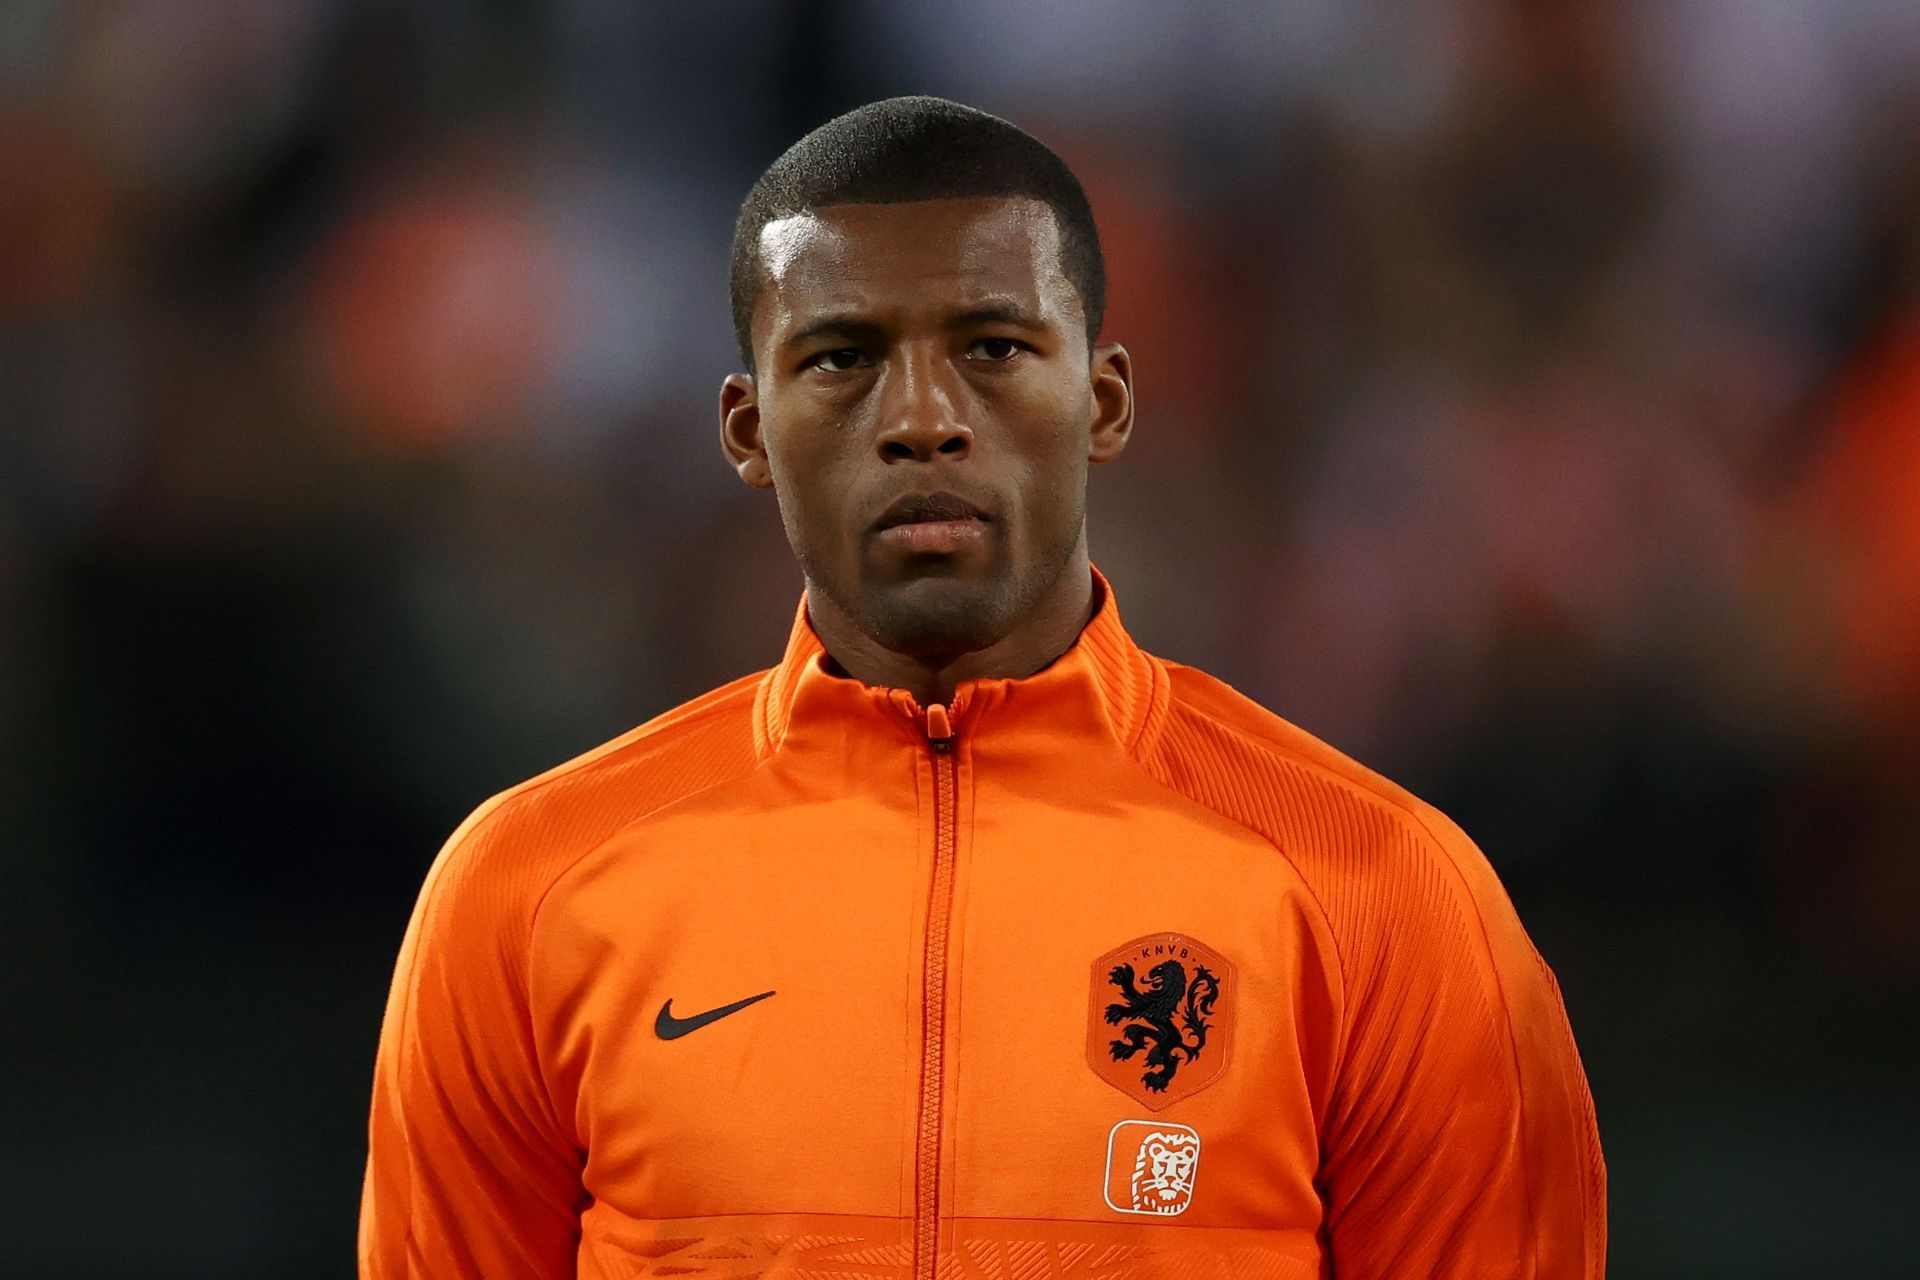 Georginio Wijnaldum has opened up about his time at PSG.